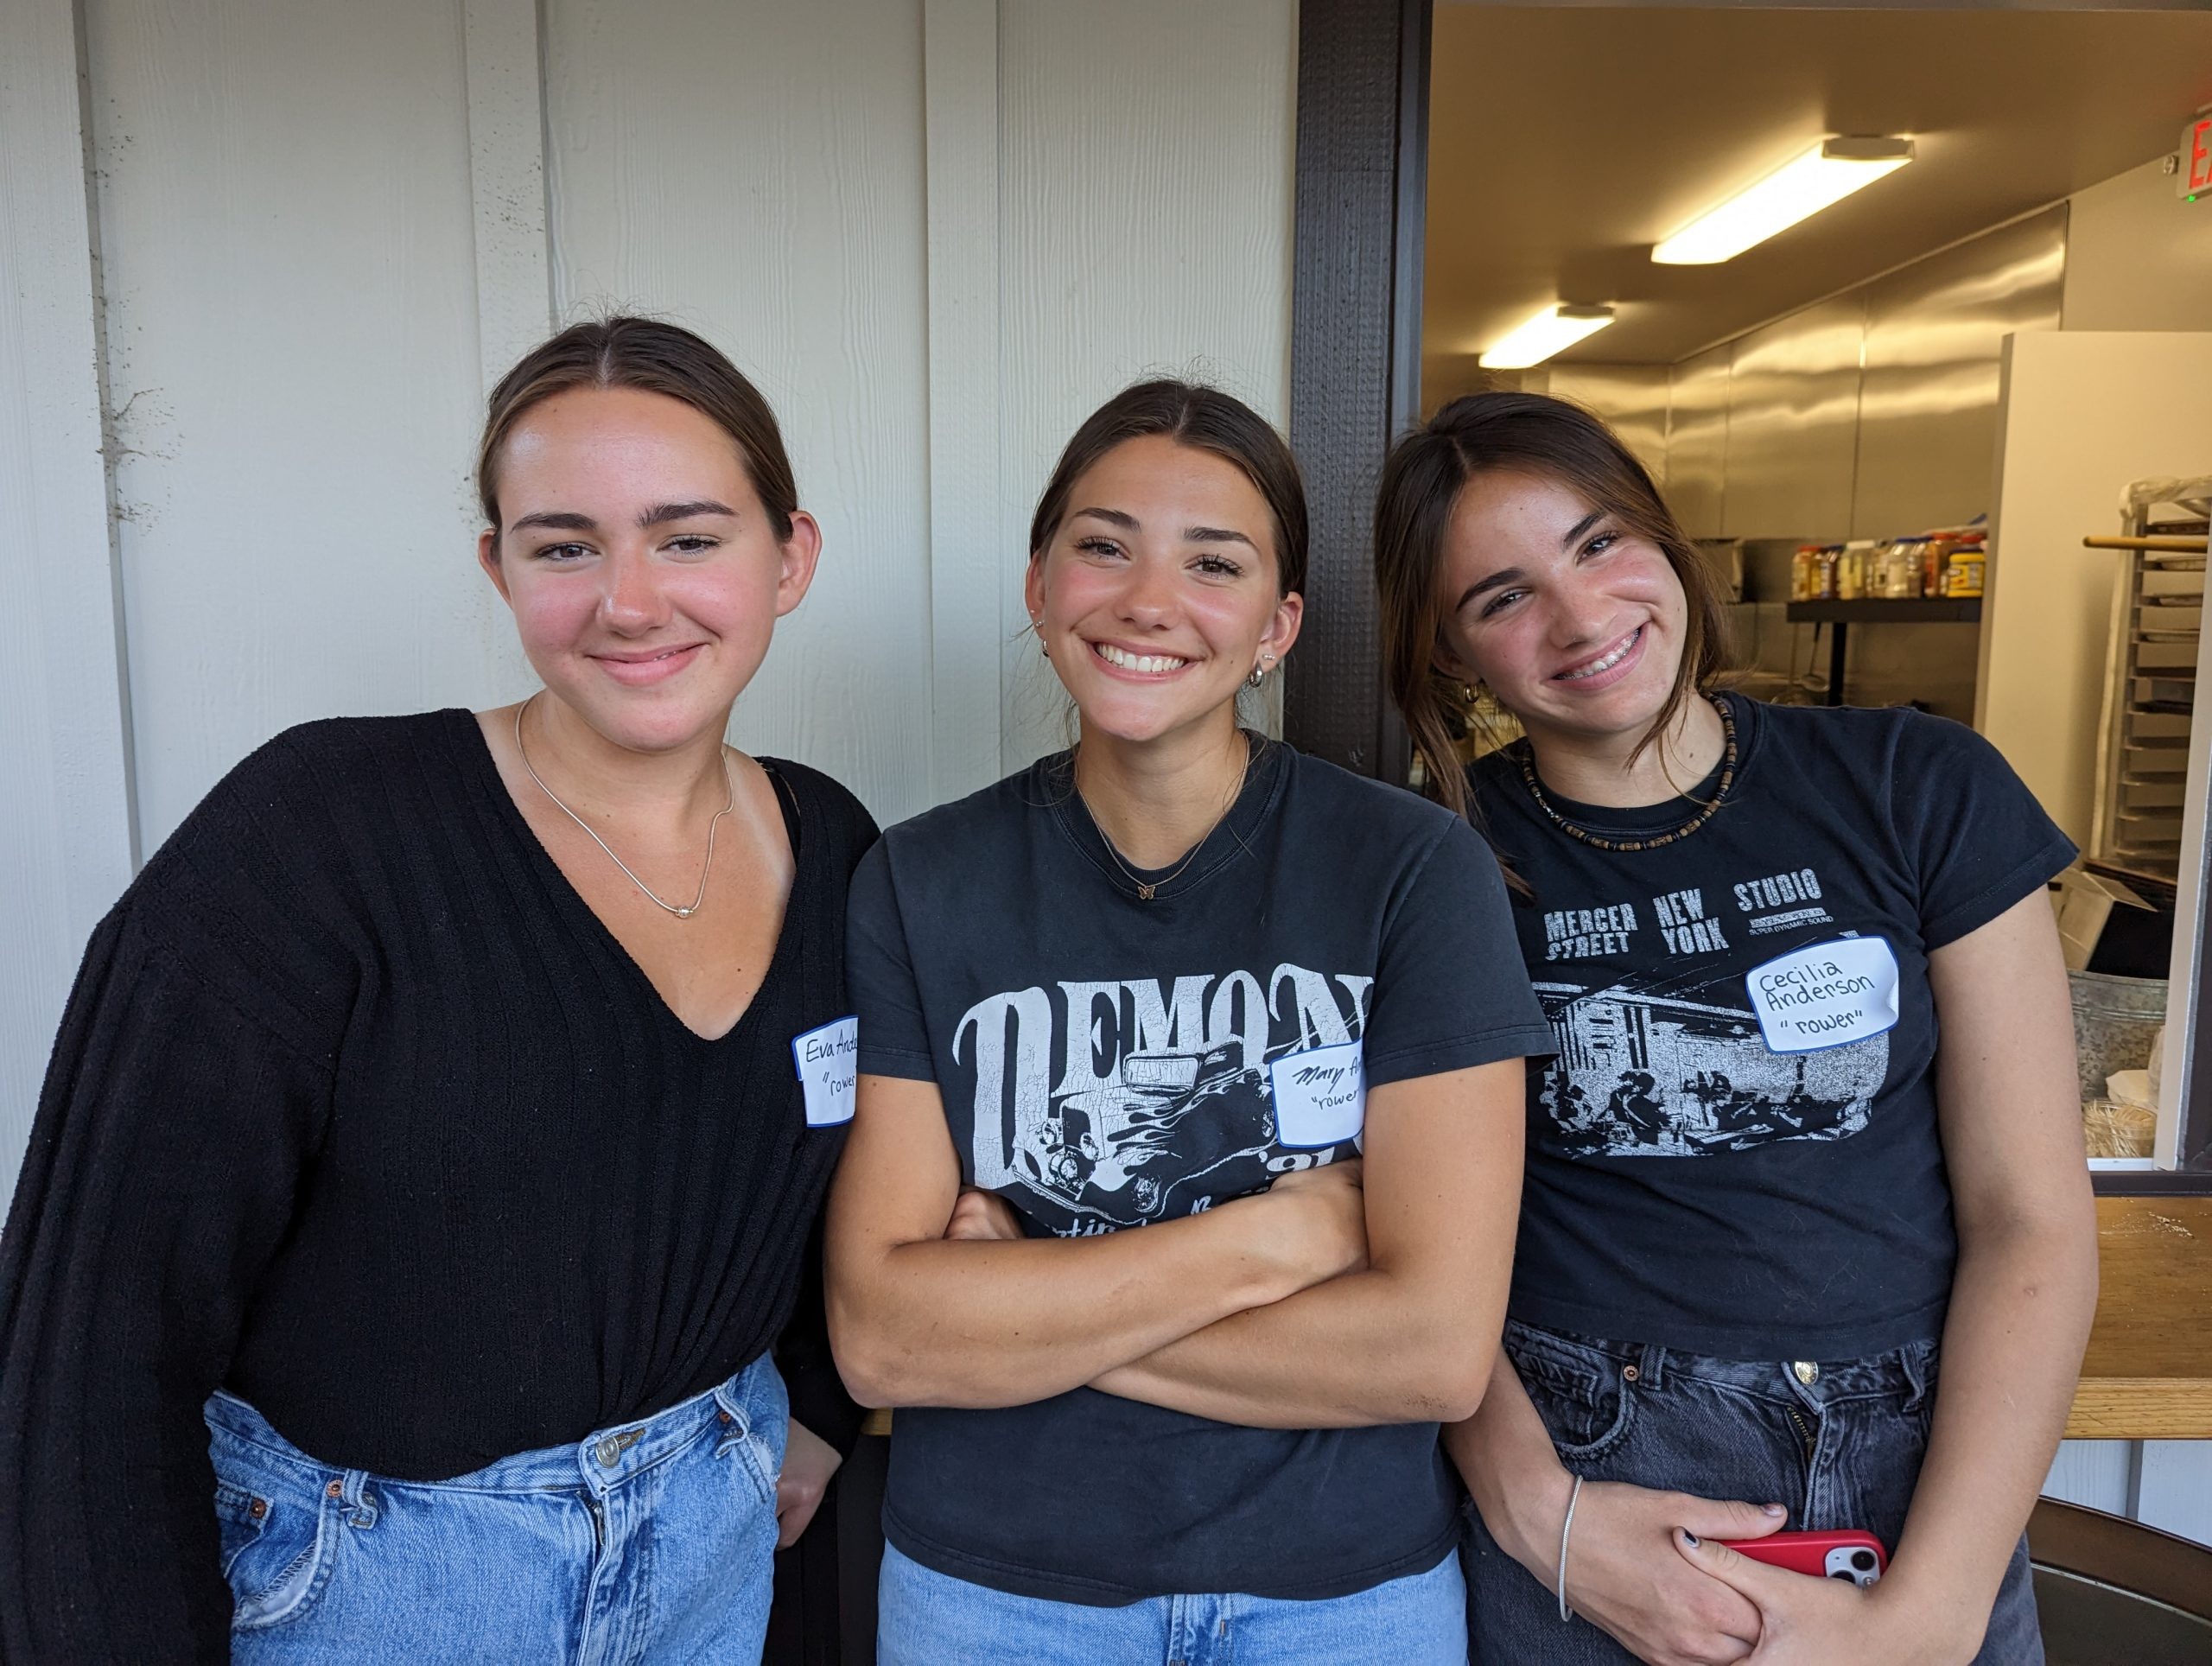 Trio of Folsom Sisters Advance to National Rowing Competition